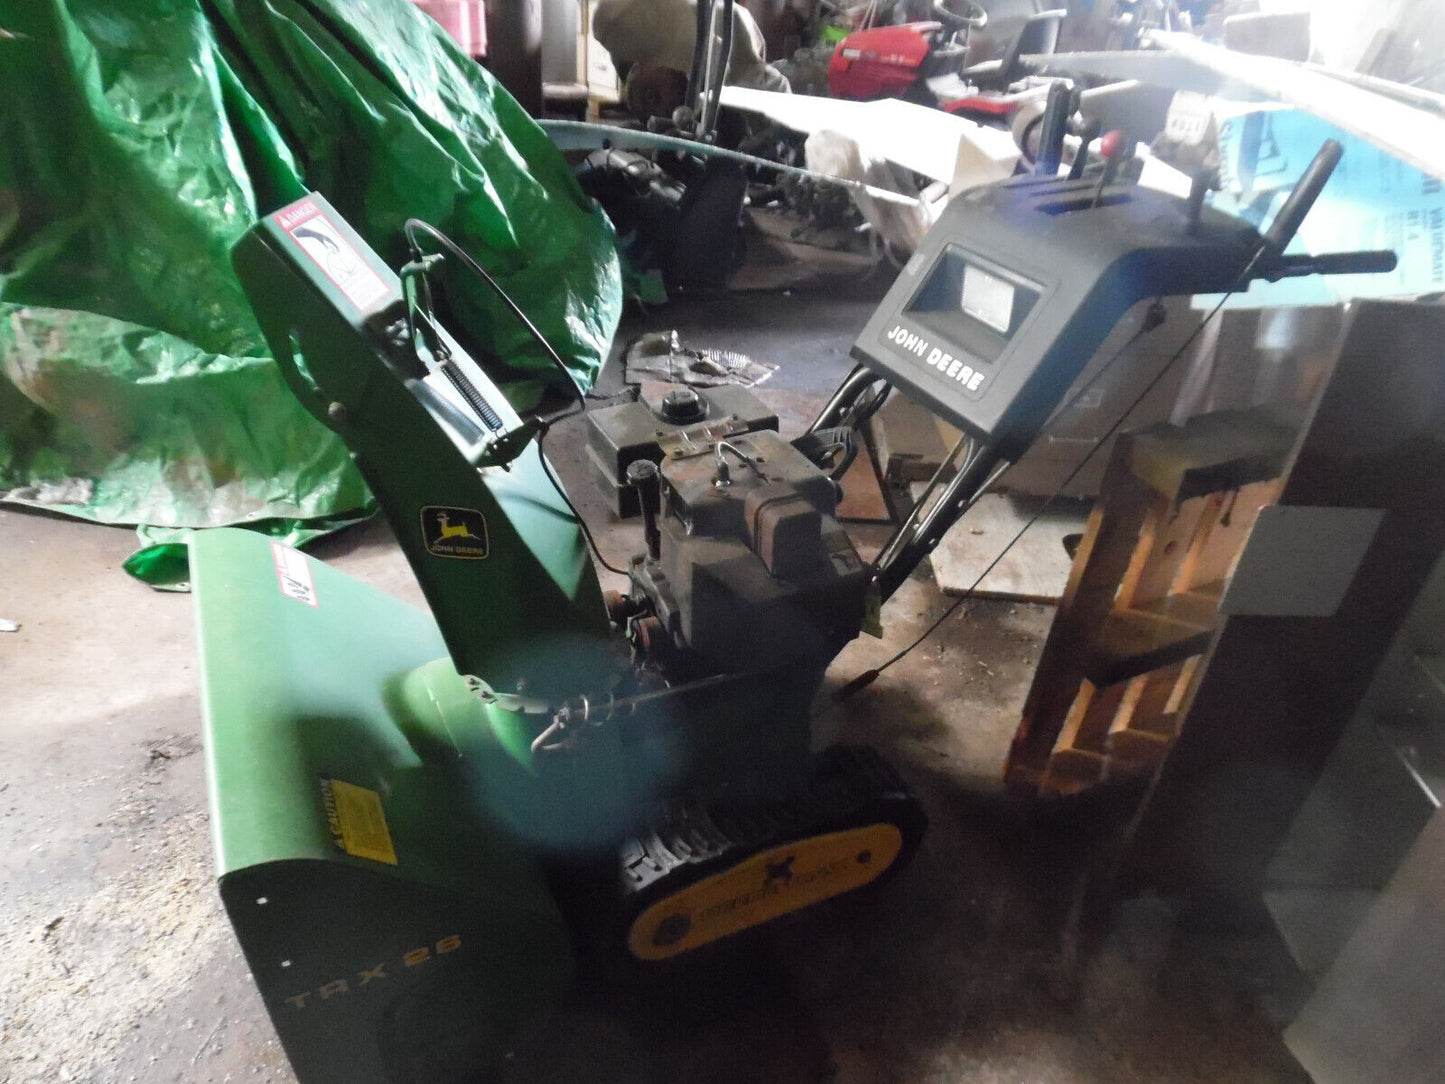 John Deere TRX26 Track Snowblower in great cond thrower 2 stage used